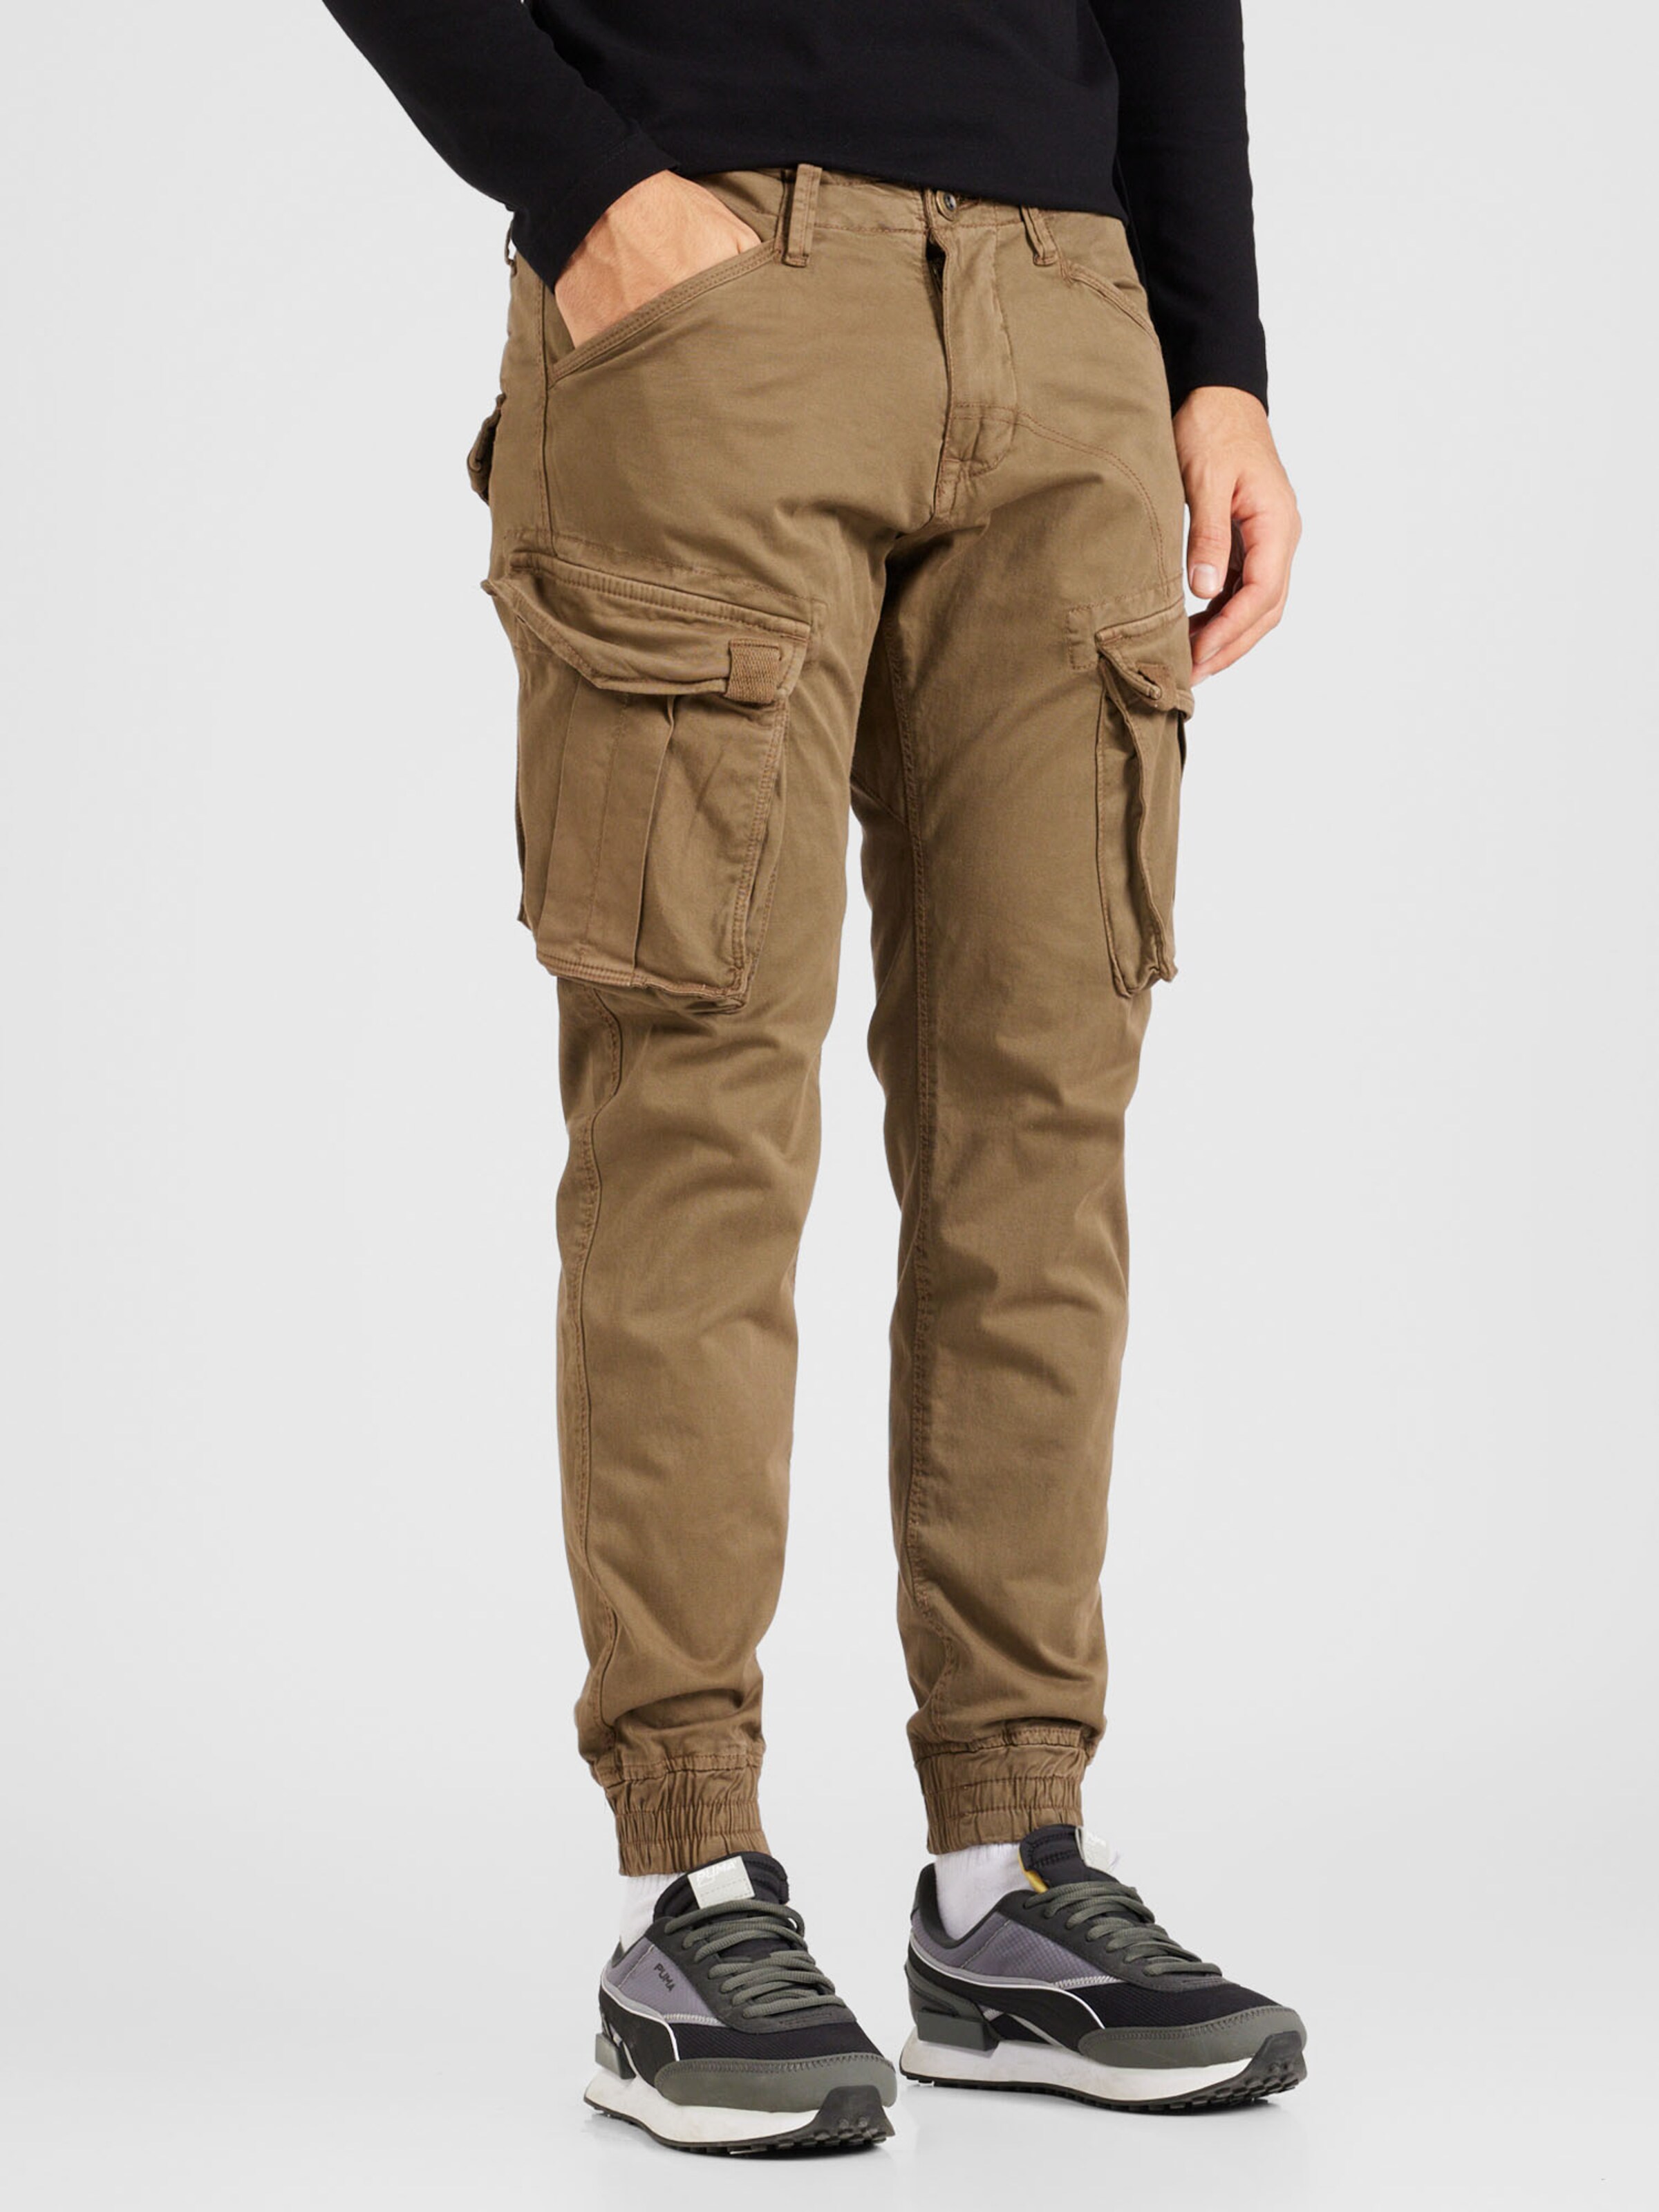 Buy Brown Light Gray and Maroon Combo of 3 Four Pocket Cargo Pants Cotton  for Best Price, Reviews, Free Shipping